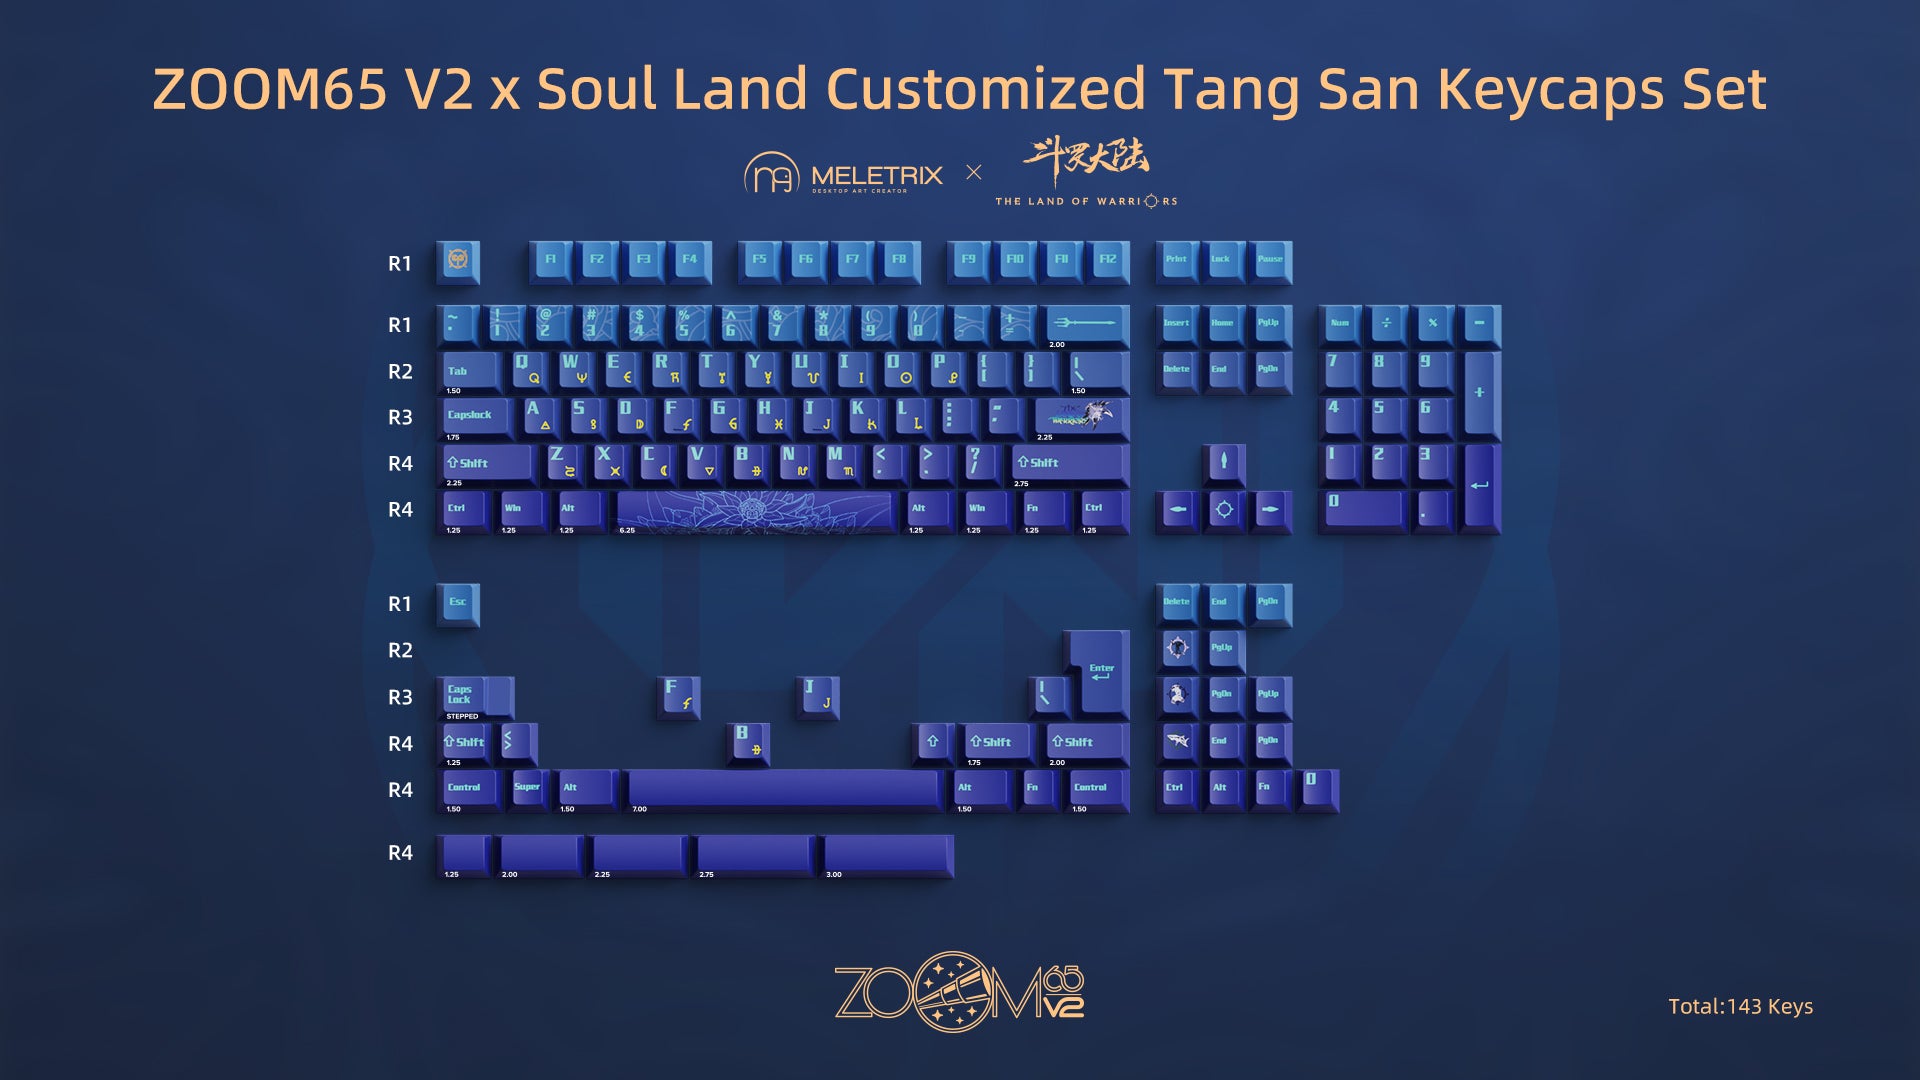 [Group Buy] ZOOM65 V2 x Soul Land Series Add-Ons by Meletrix